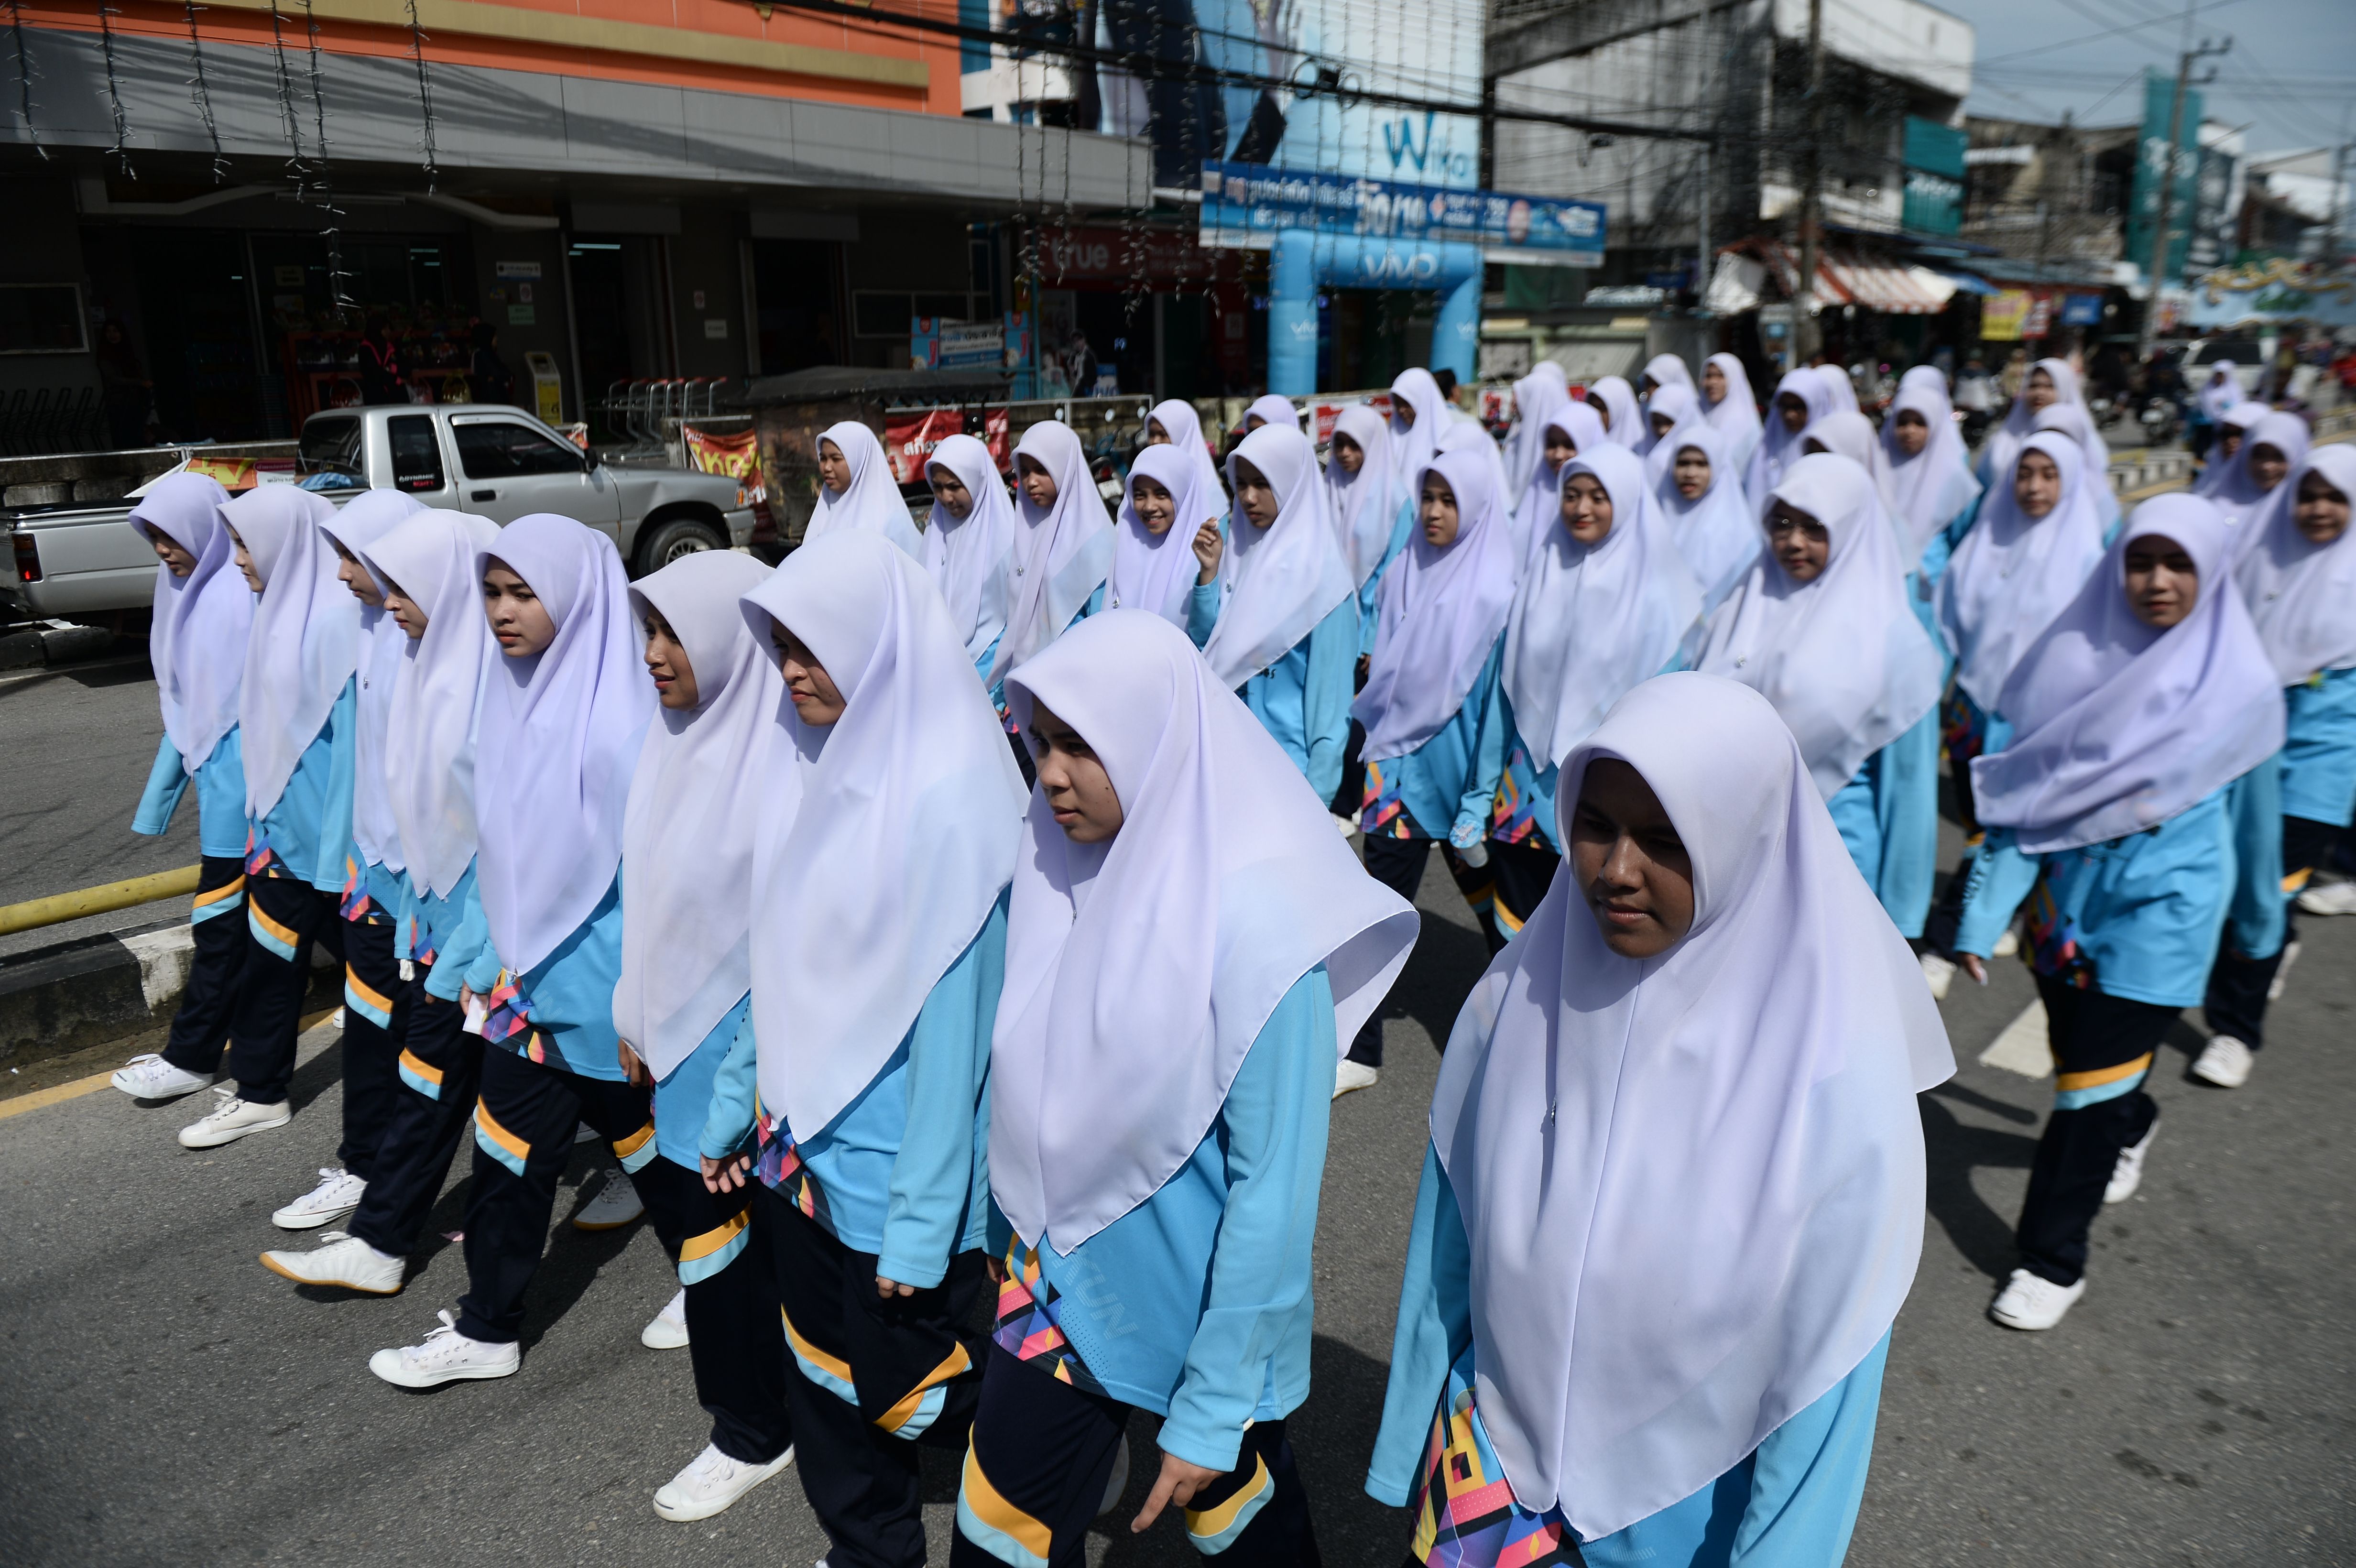 Muslim students from Princess of Naradhiwas University participate in the university's annual parade in Thailand's predominantly Muslim province of Narathiwat on Nvoebmer 12, 2018. (MADAREE TOHLALA/AFP/Getty Images)